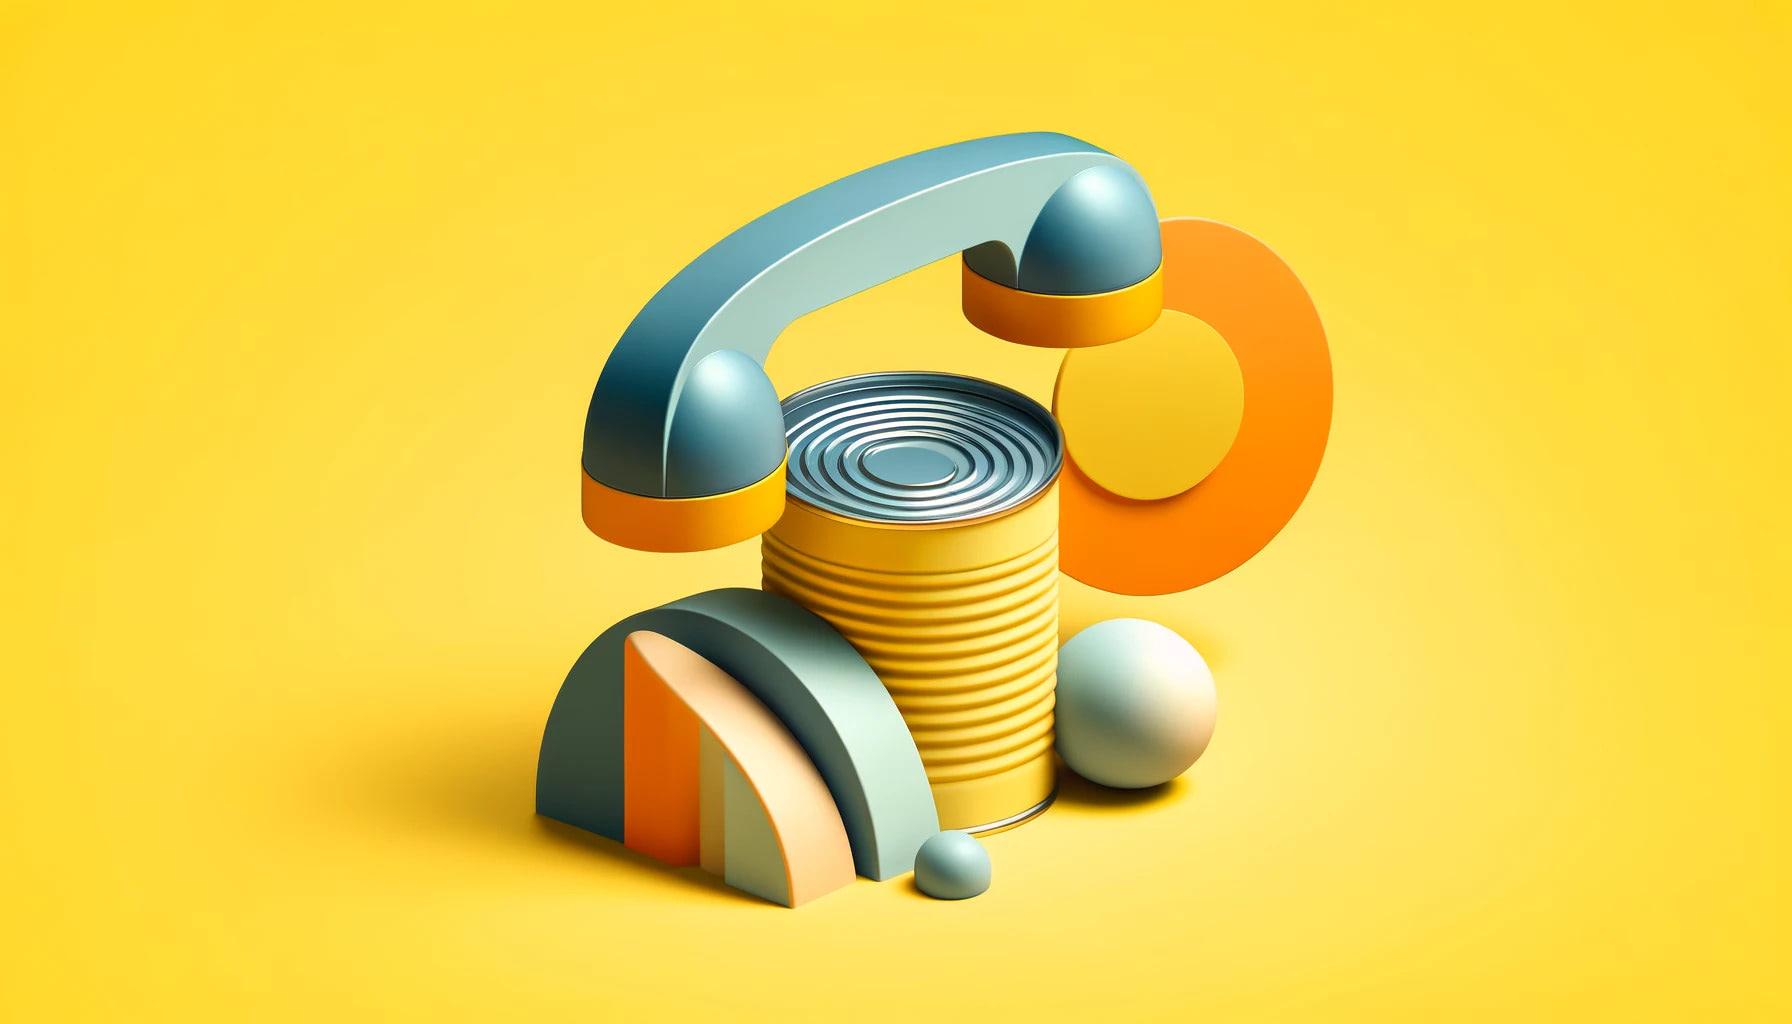 Abstract, minimalist 3D-like image of a Tin can telephone in summer colors, featuring bright yellow, sky blue, and pale orange, styled with geometric shapes in a modern artistic composition.